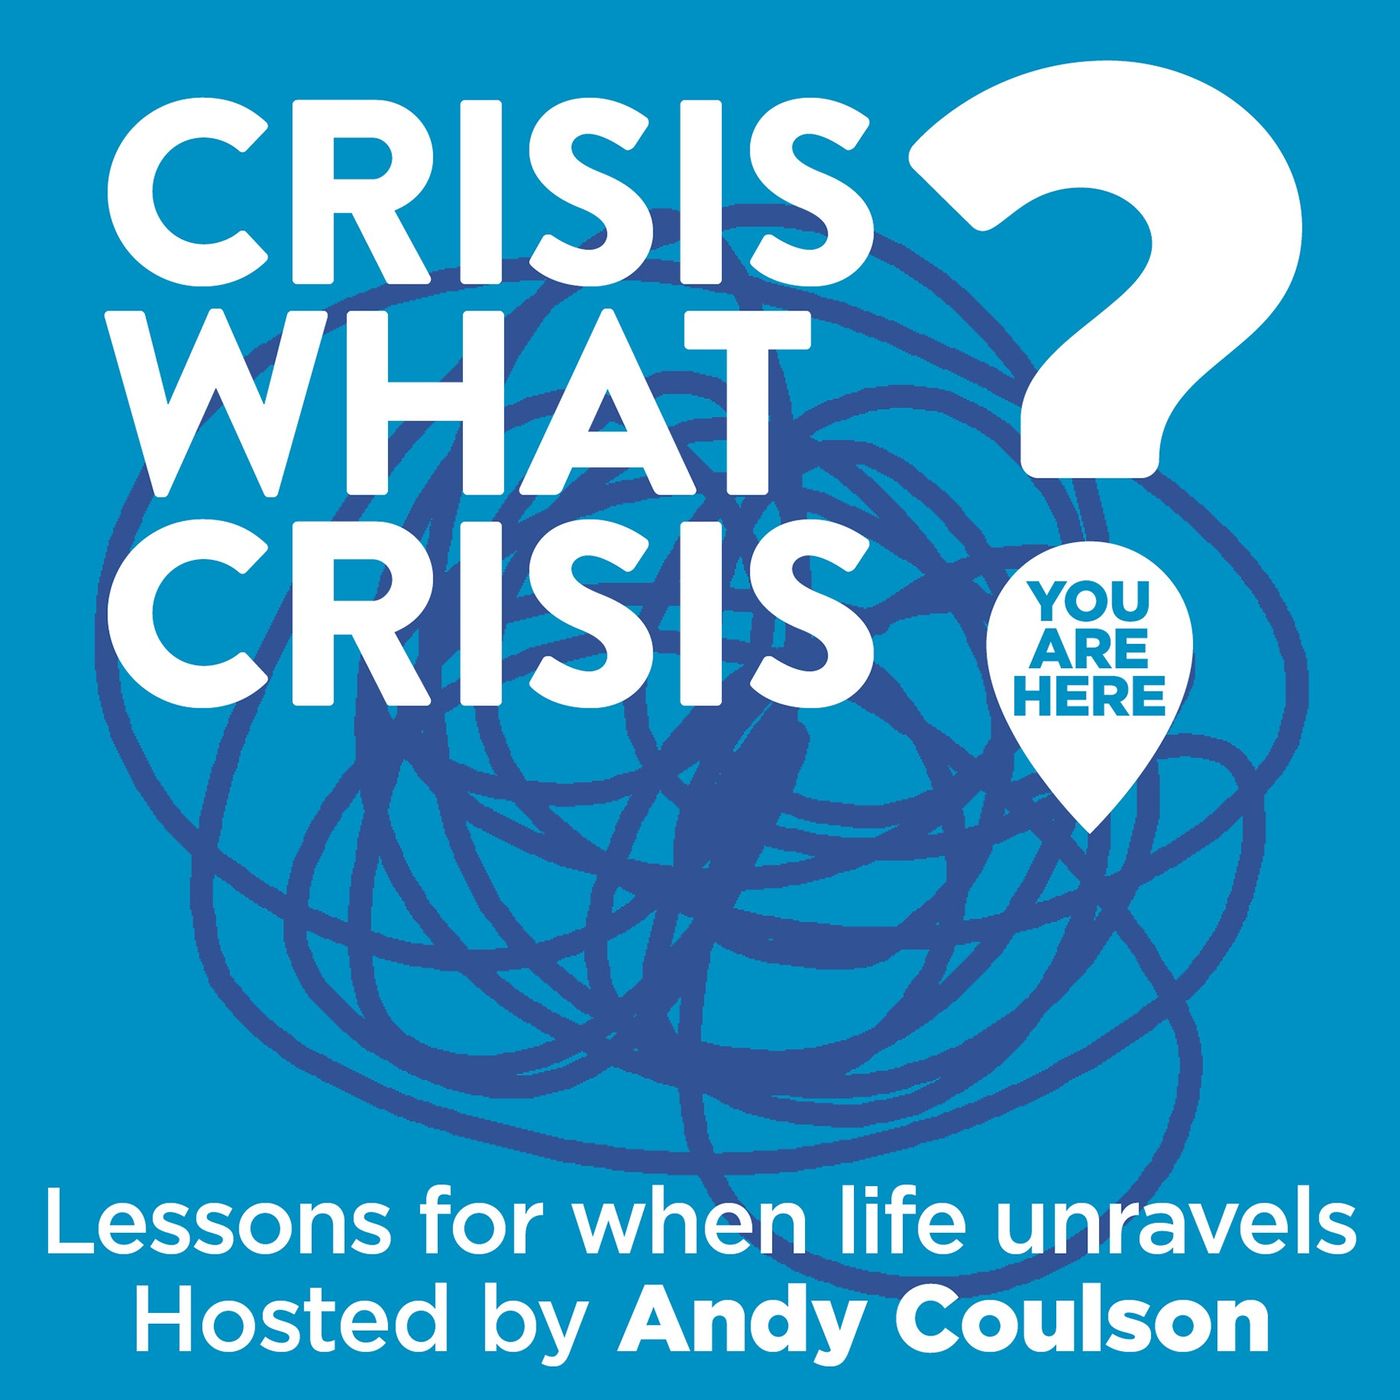 9. Ruby Wax on anger, optimism and taking ownership of your crisis